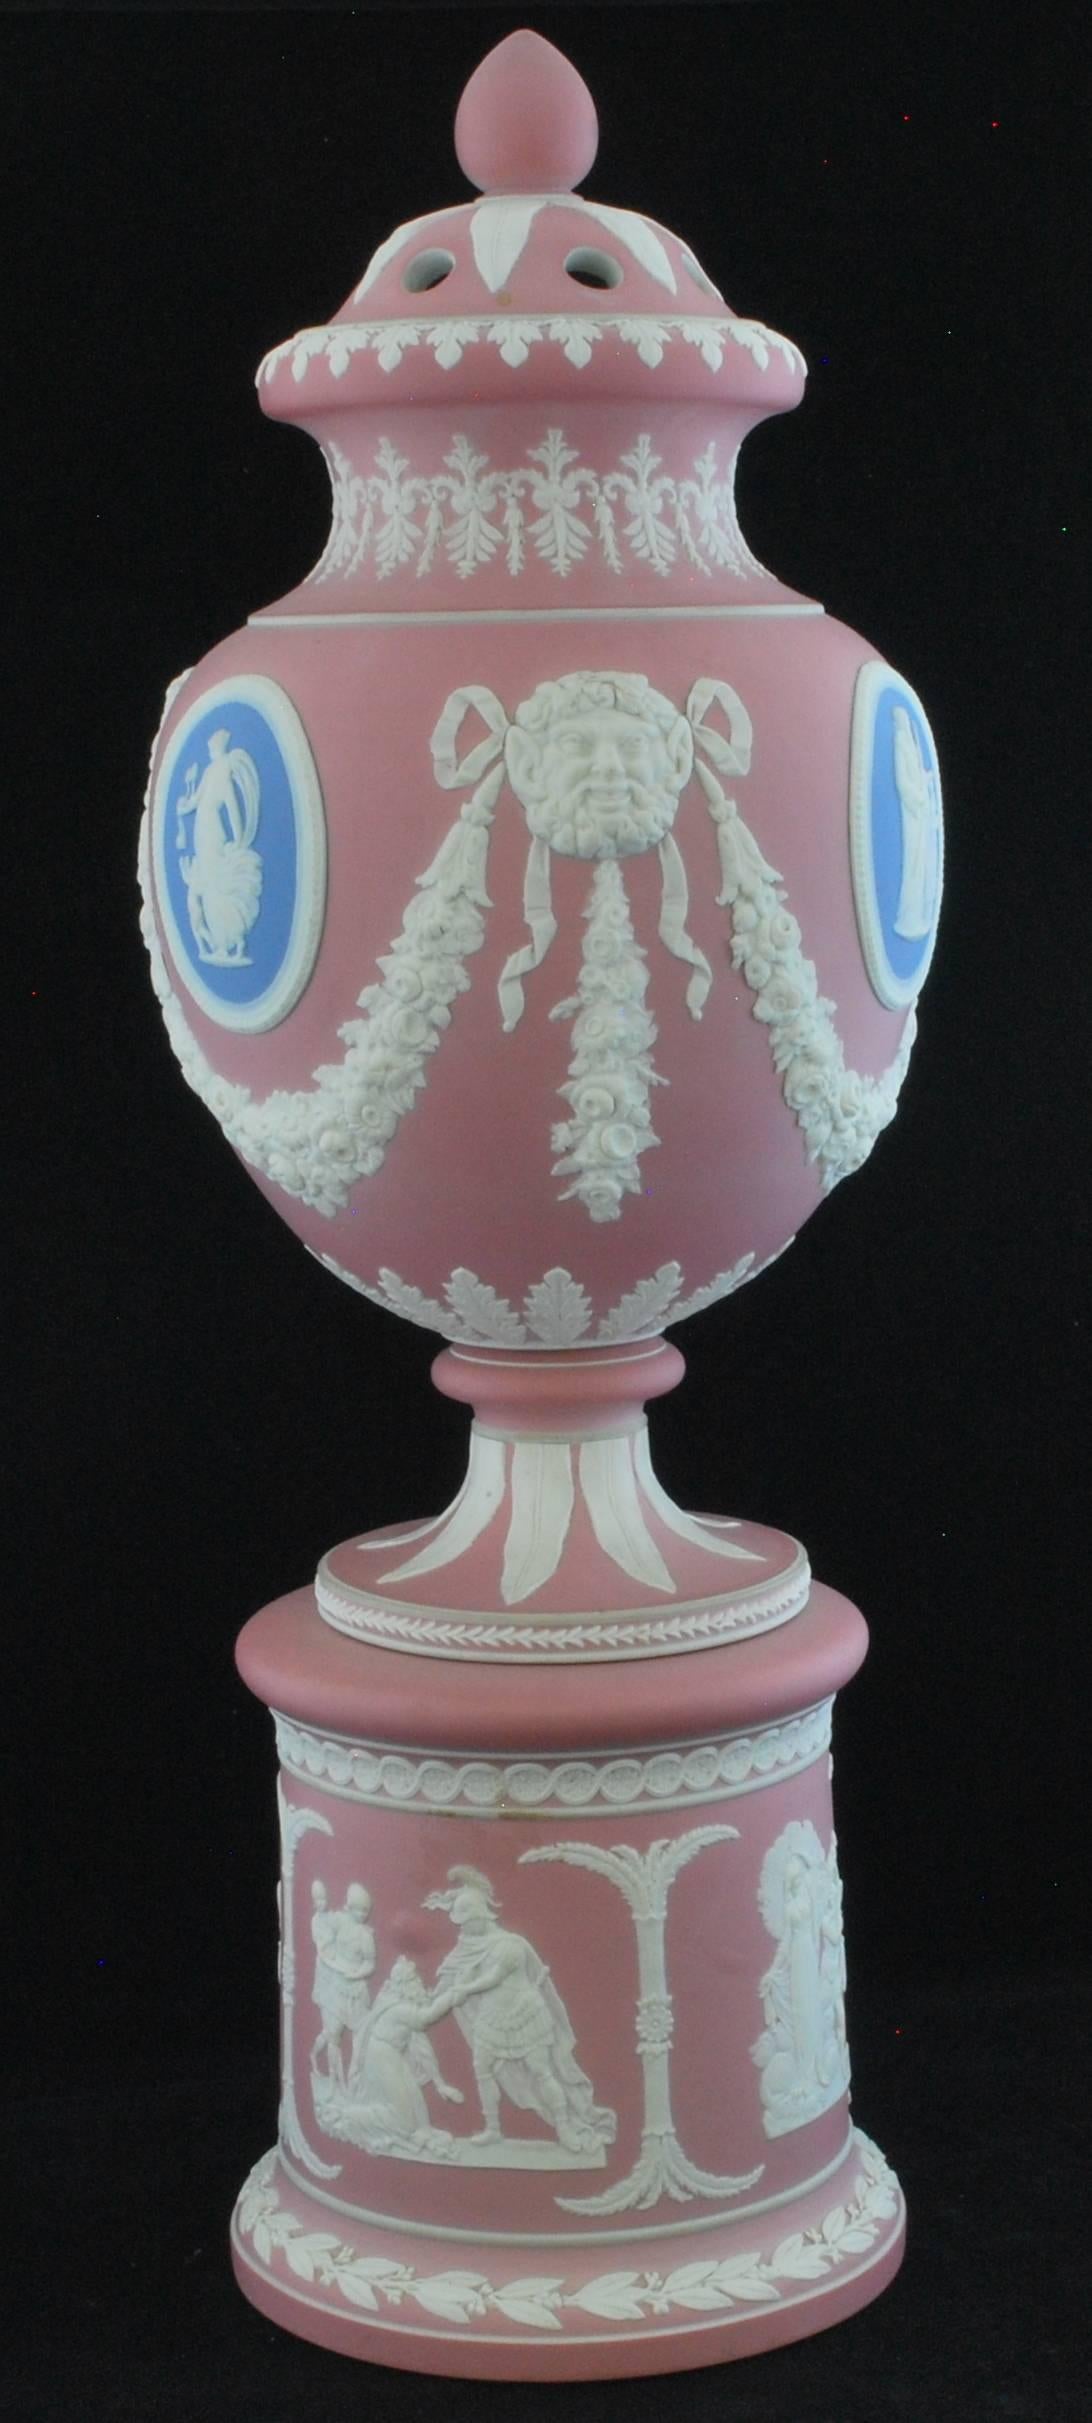 A tall vase on a drum base, in Dudson's distinctive pink jasperware, set with blue and white reliefs.

Dudson was an imitator of Wedgwood, and often left their wares unmarked with the intention that they would be mistaken for it. The quality is